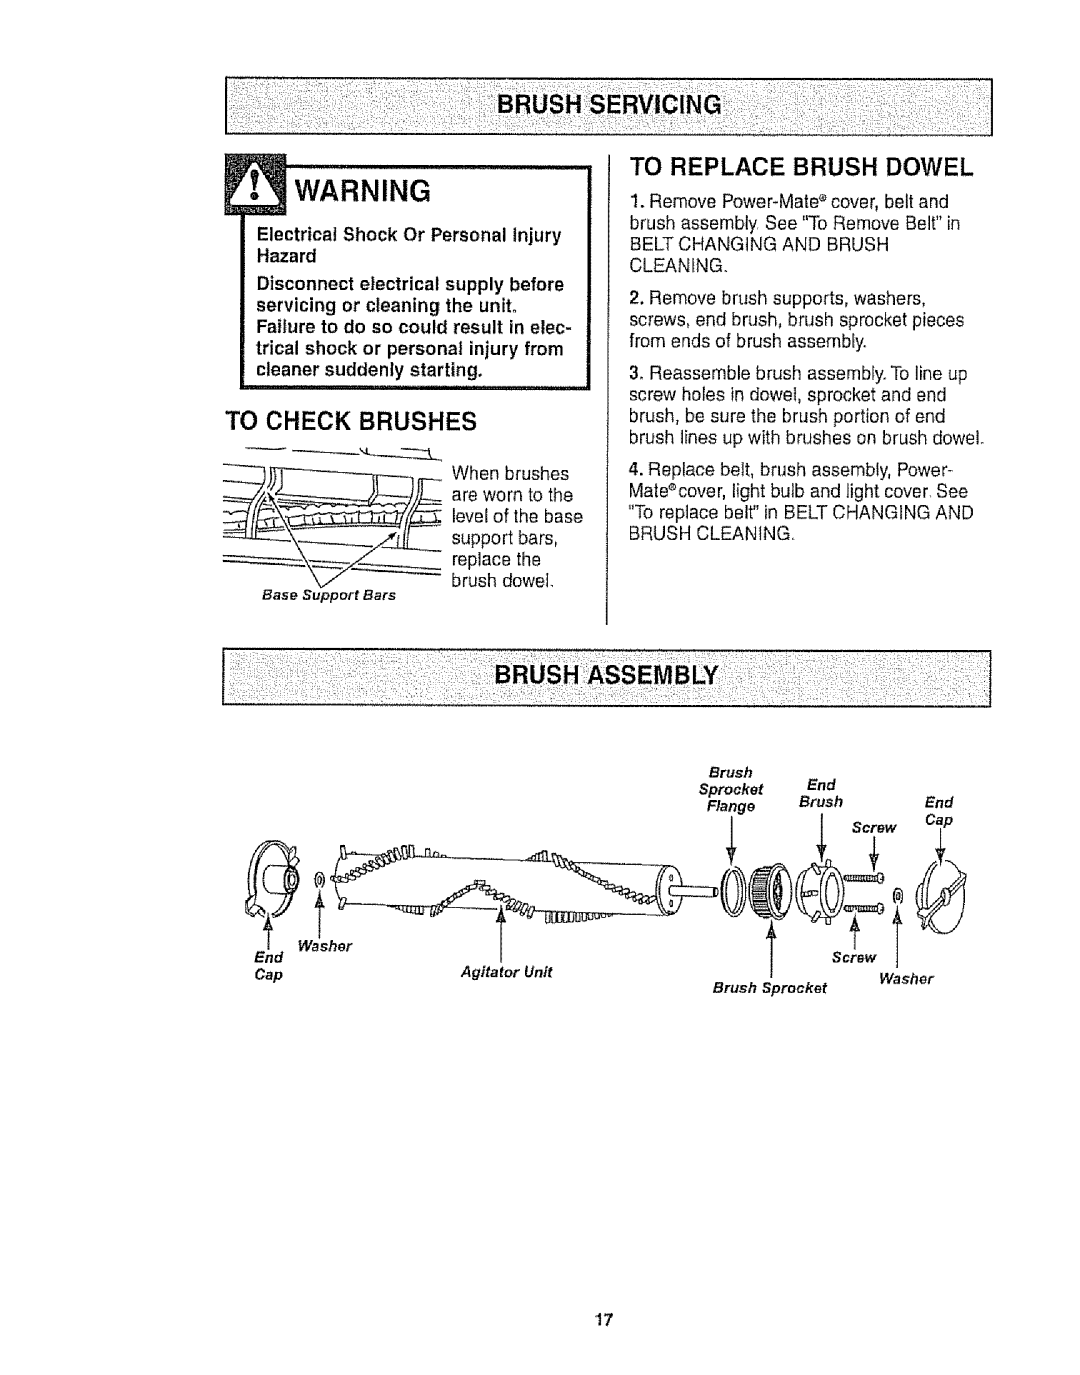 Kenmore 116.21513, 116.20512 owner manual To Check Brushes, Disconnect electrical, supply, servicing or cleaning the unit 